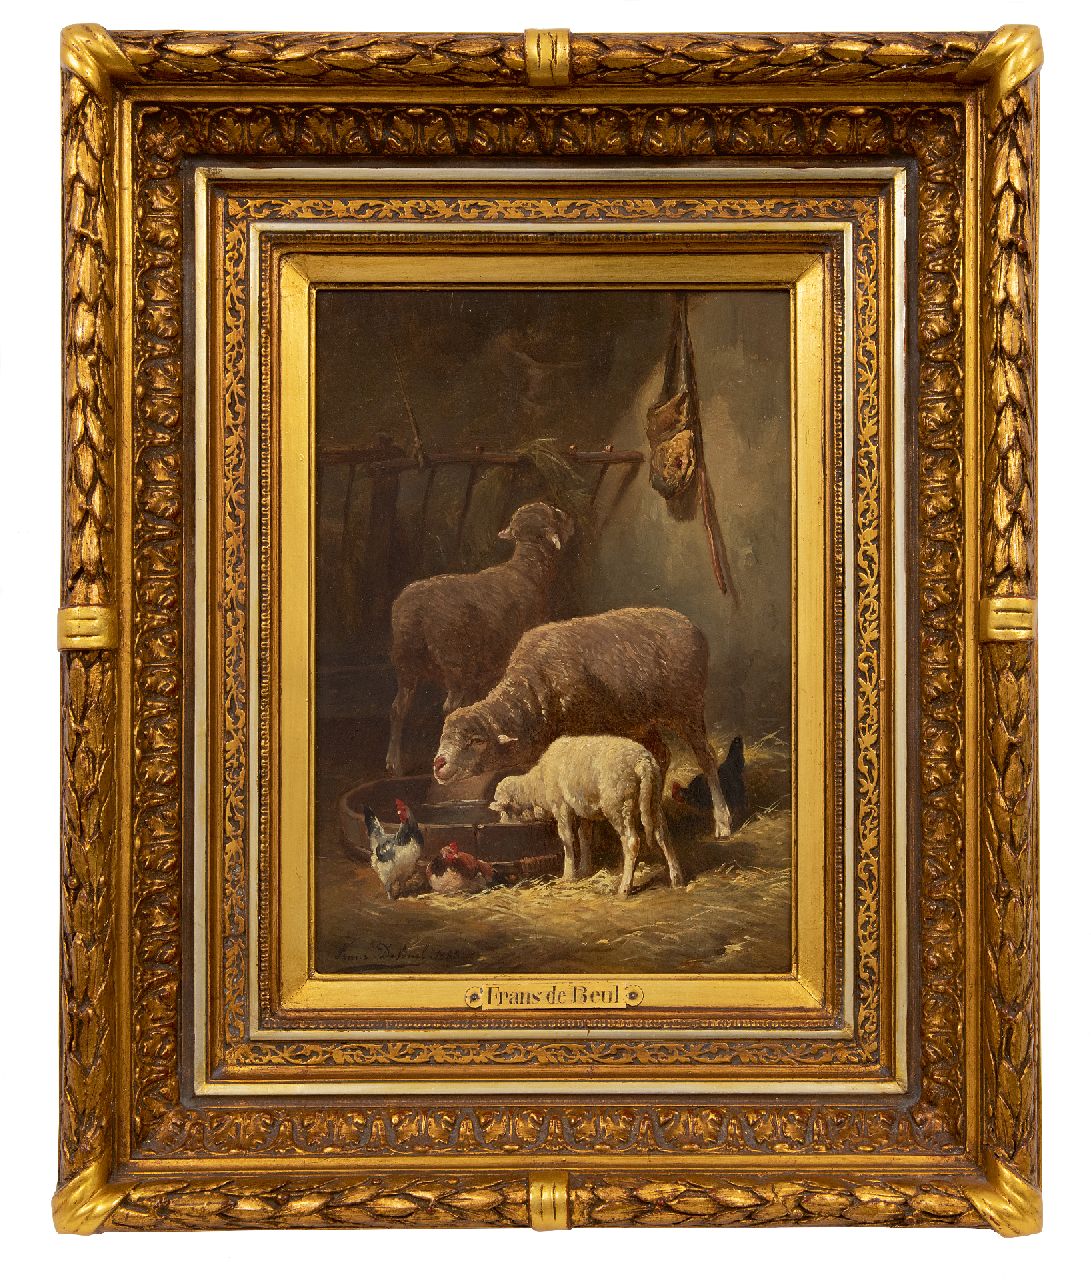 Beul F. de | Frans de Beul | Paintings offered for sale | Sheep in the stable, oil on panel 34.3 x 23.2 cm, signed l.l. and dated 1883